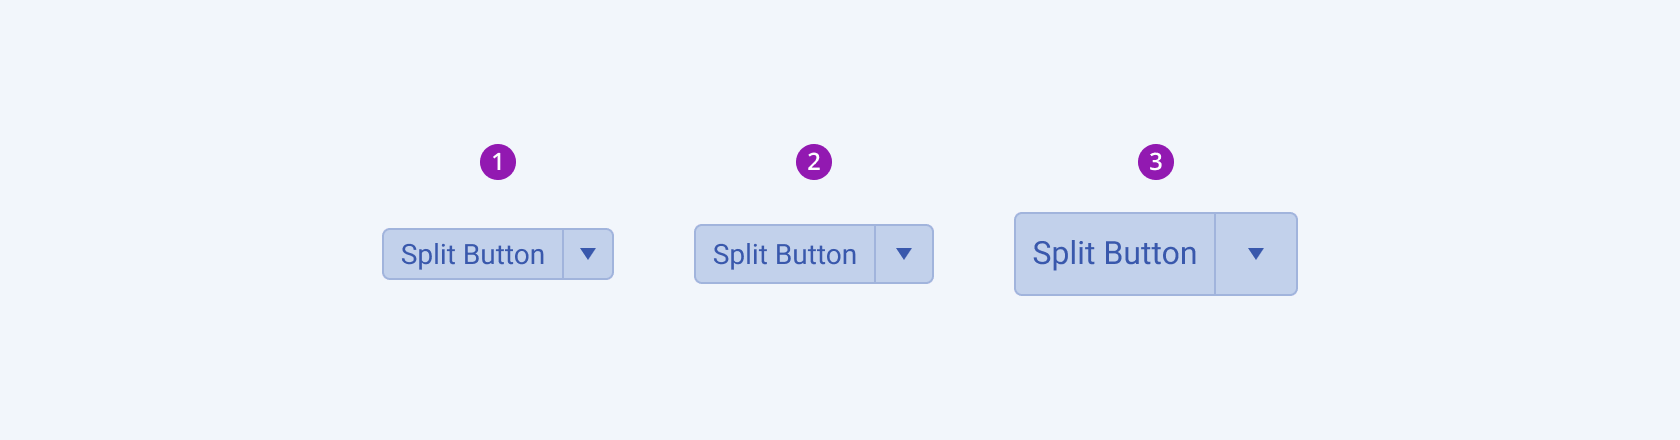 Three Telerik and Kendo UI SplitButton components demonstrating the small, default medium, and large sizes respectively.